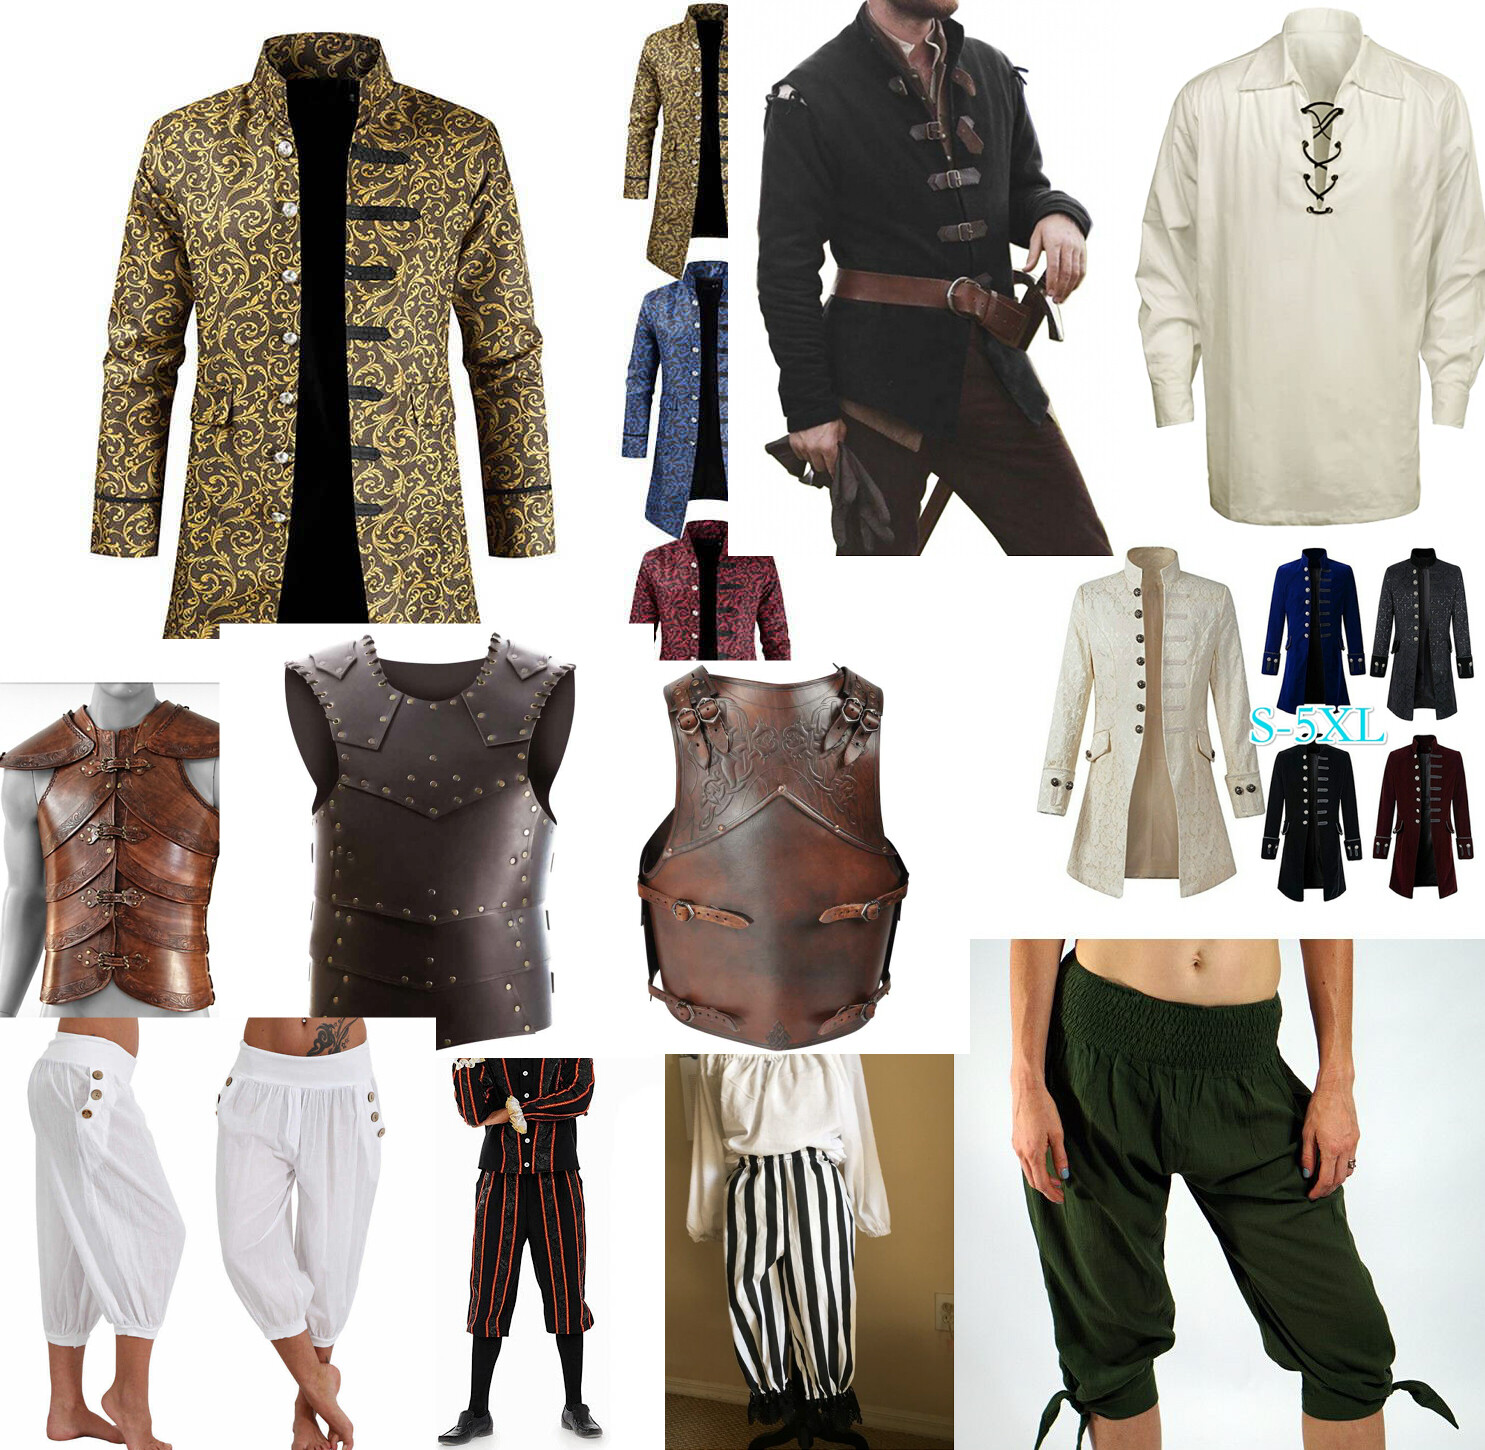 I also assembled a large amount of costume references that matched the style I was going for.  The model is based on a Dungeons and Dragons character I play, so  I wanted to convey his flashy sense of fashion through medieval-style clothing.